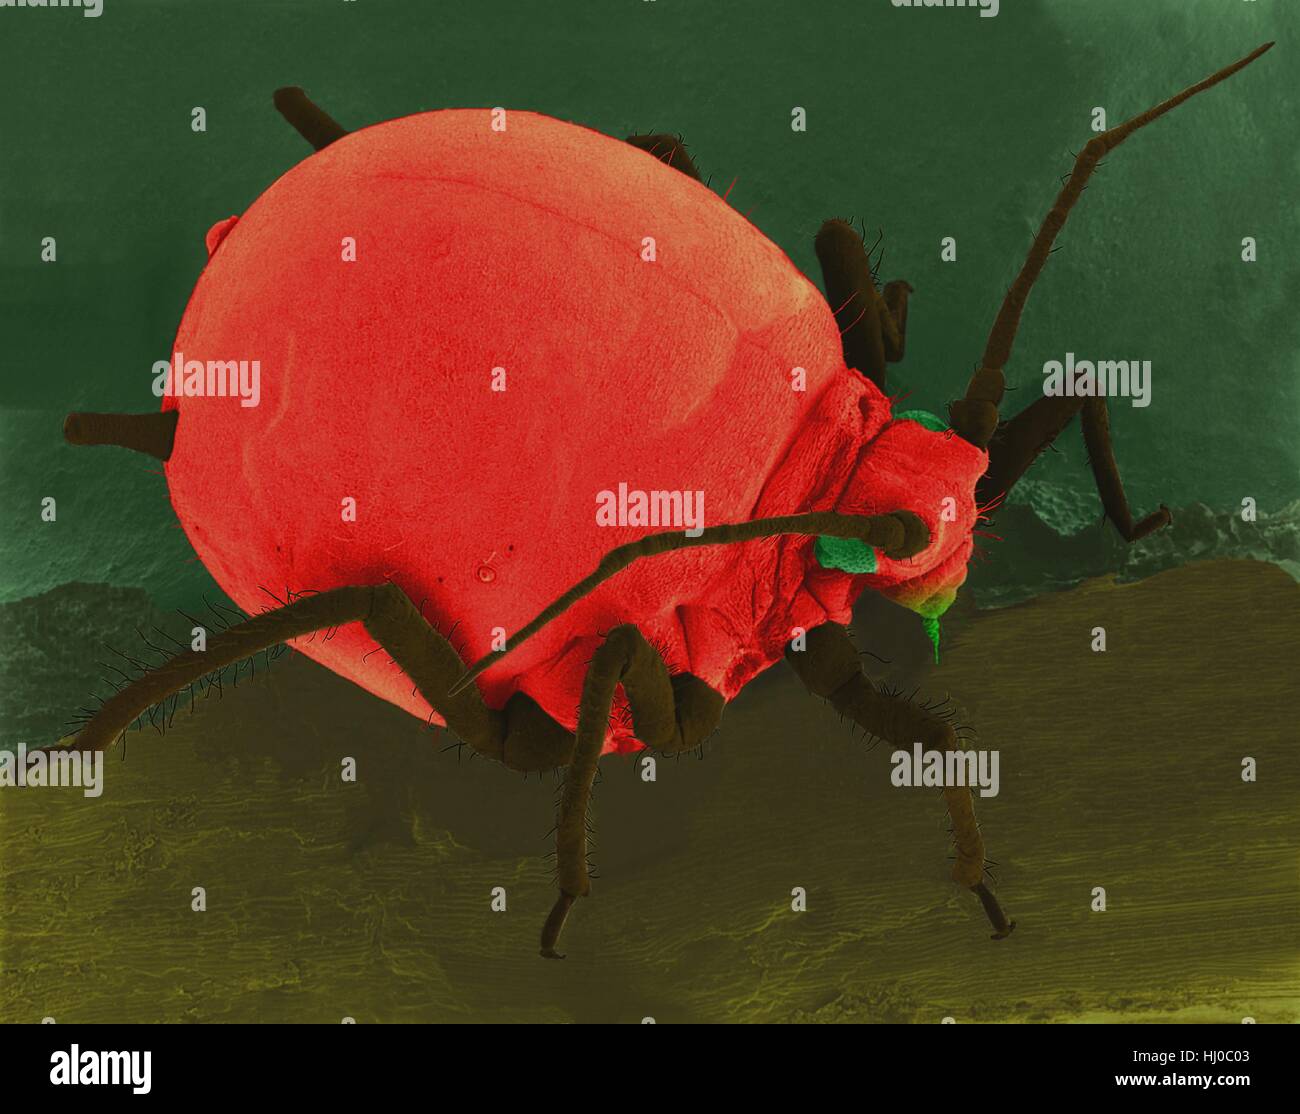 Coloured scanning electron micrograph (SEM) of Cotton aphid (Aphis gossypii) on an hibiscus leaf. Also called the melon aphid it is commonly associated with outbreaks on cotton in the Southeast. This insect has many generations per year and is often resistant to insecticides. This aphid carries an isometric virus which causes cucumber mosaic disease in cucumber and tobacco plants. Magnification: x11 when shortest axis printed at 25 millimetres. Stock Photo